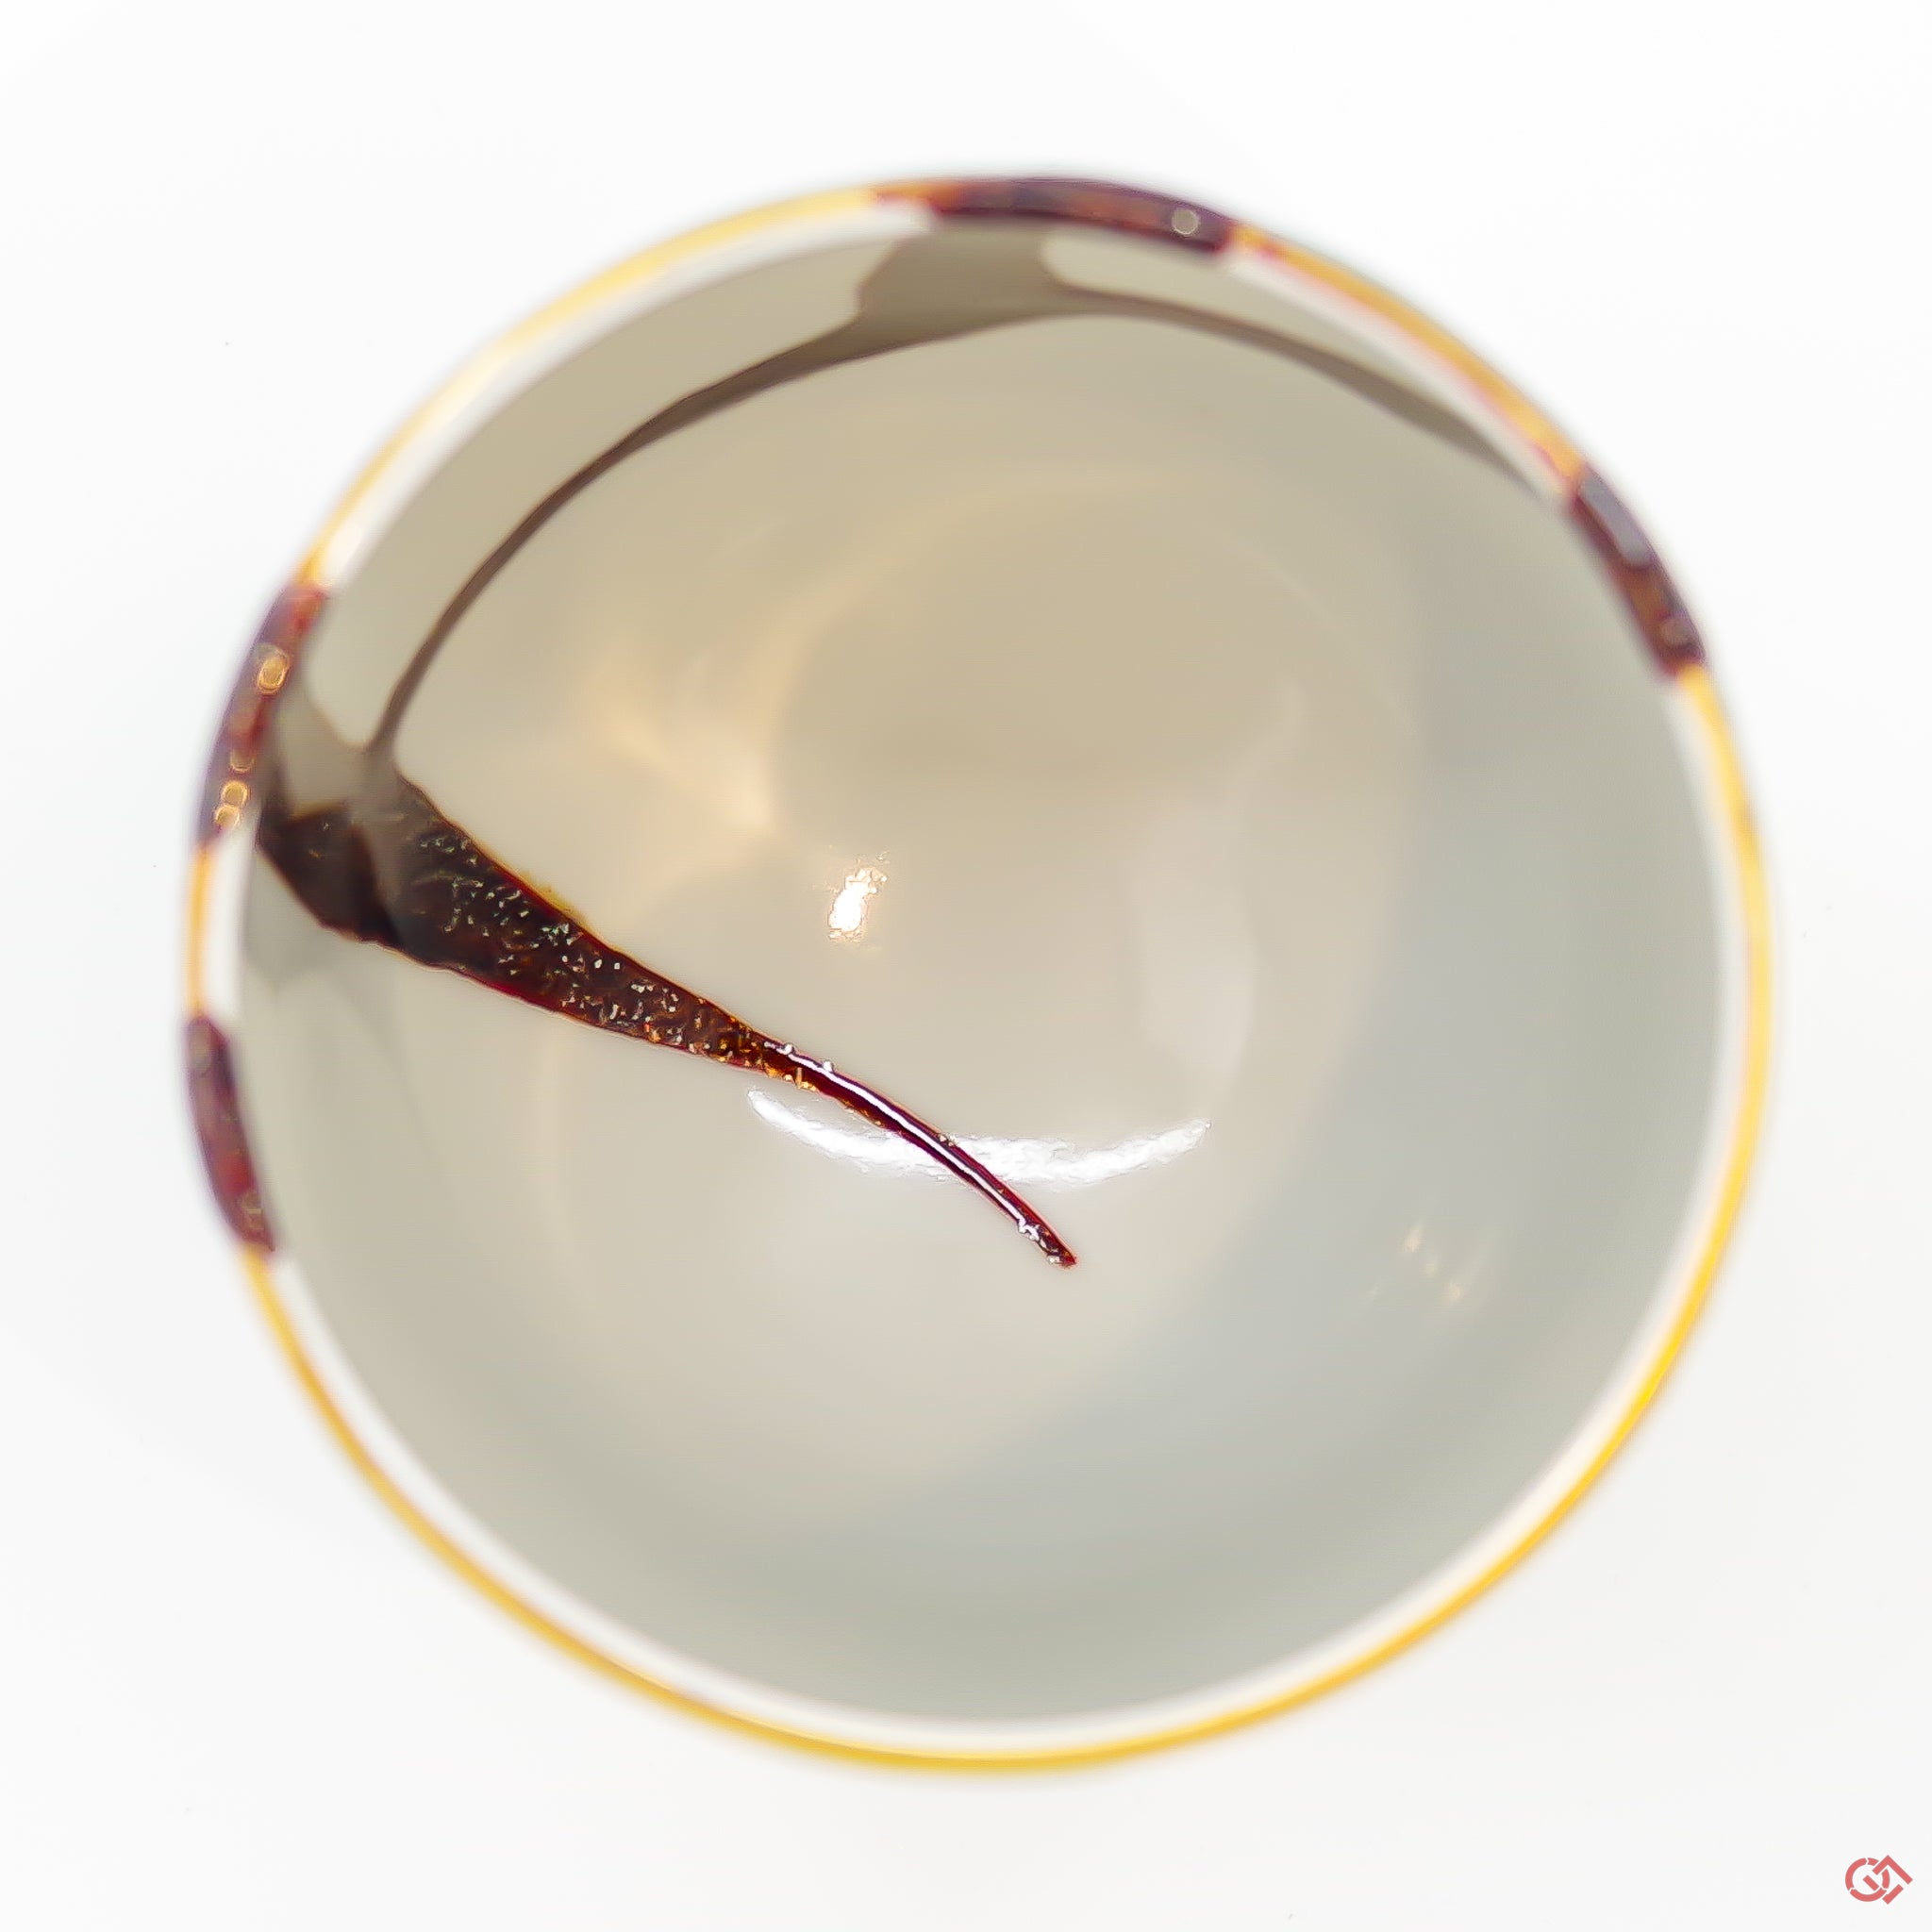 A photo of the top side of an authentic Kintsugi pottery piece, showing its overall design and features.